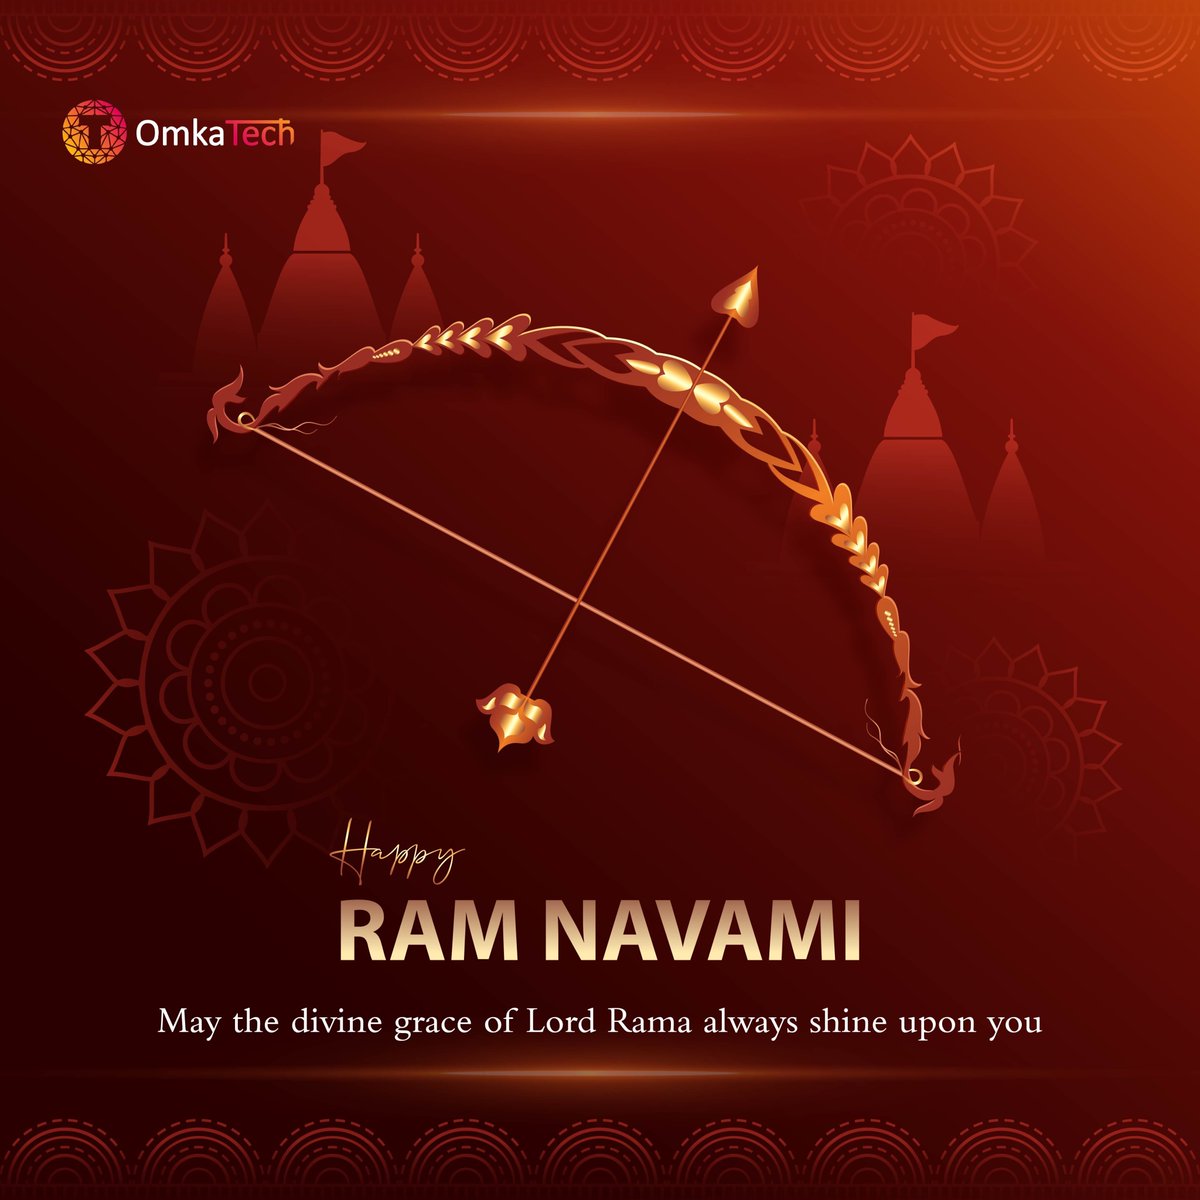 Omka Tech wishes you all a blissful Ram Navami filled with divine blessings and happiness. 

May the blessings of Lord Ram illuminate your path with peace, prosperity, and joy. 

Jai Shri Ram! 🙏
#RamNavami #LordRam #DivineCelebration #FestivalOfLights #JaiShriRam #OmkaTech